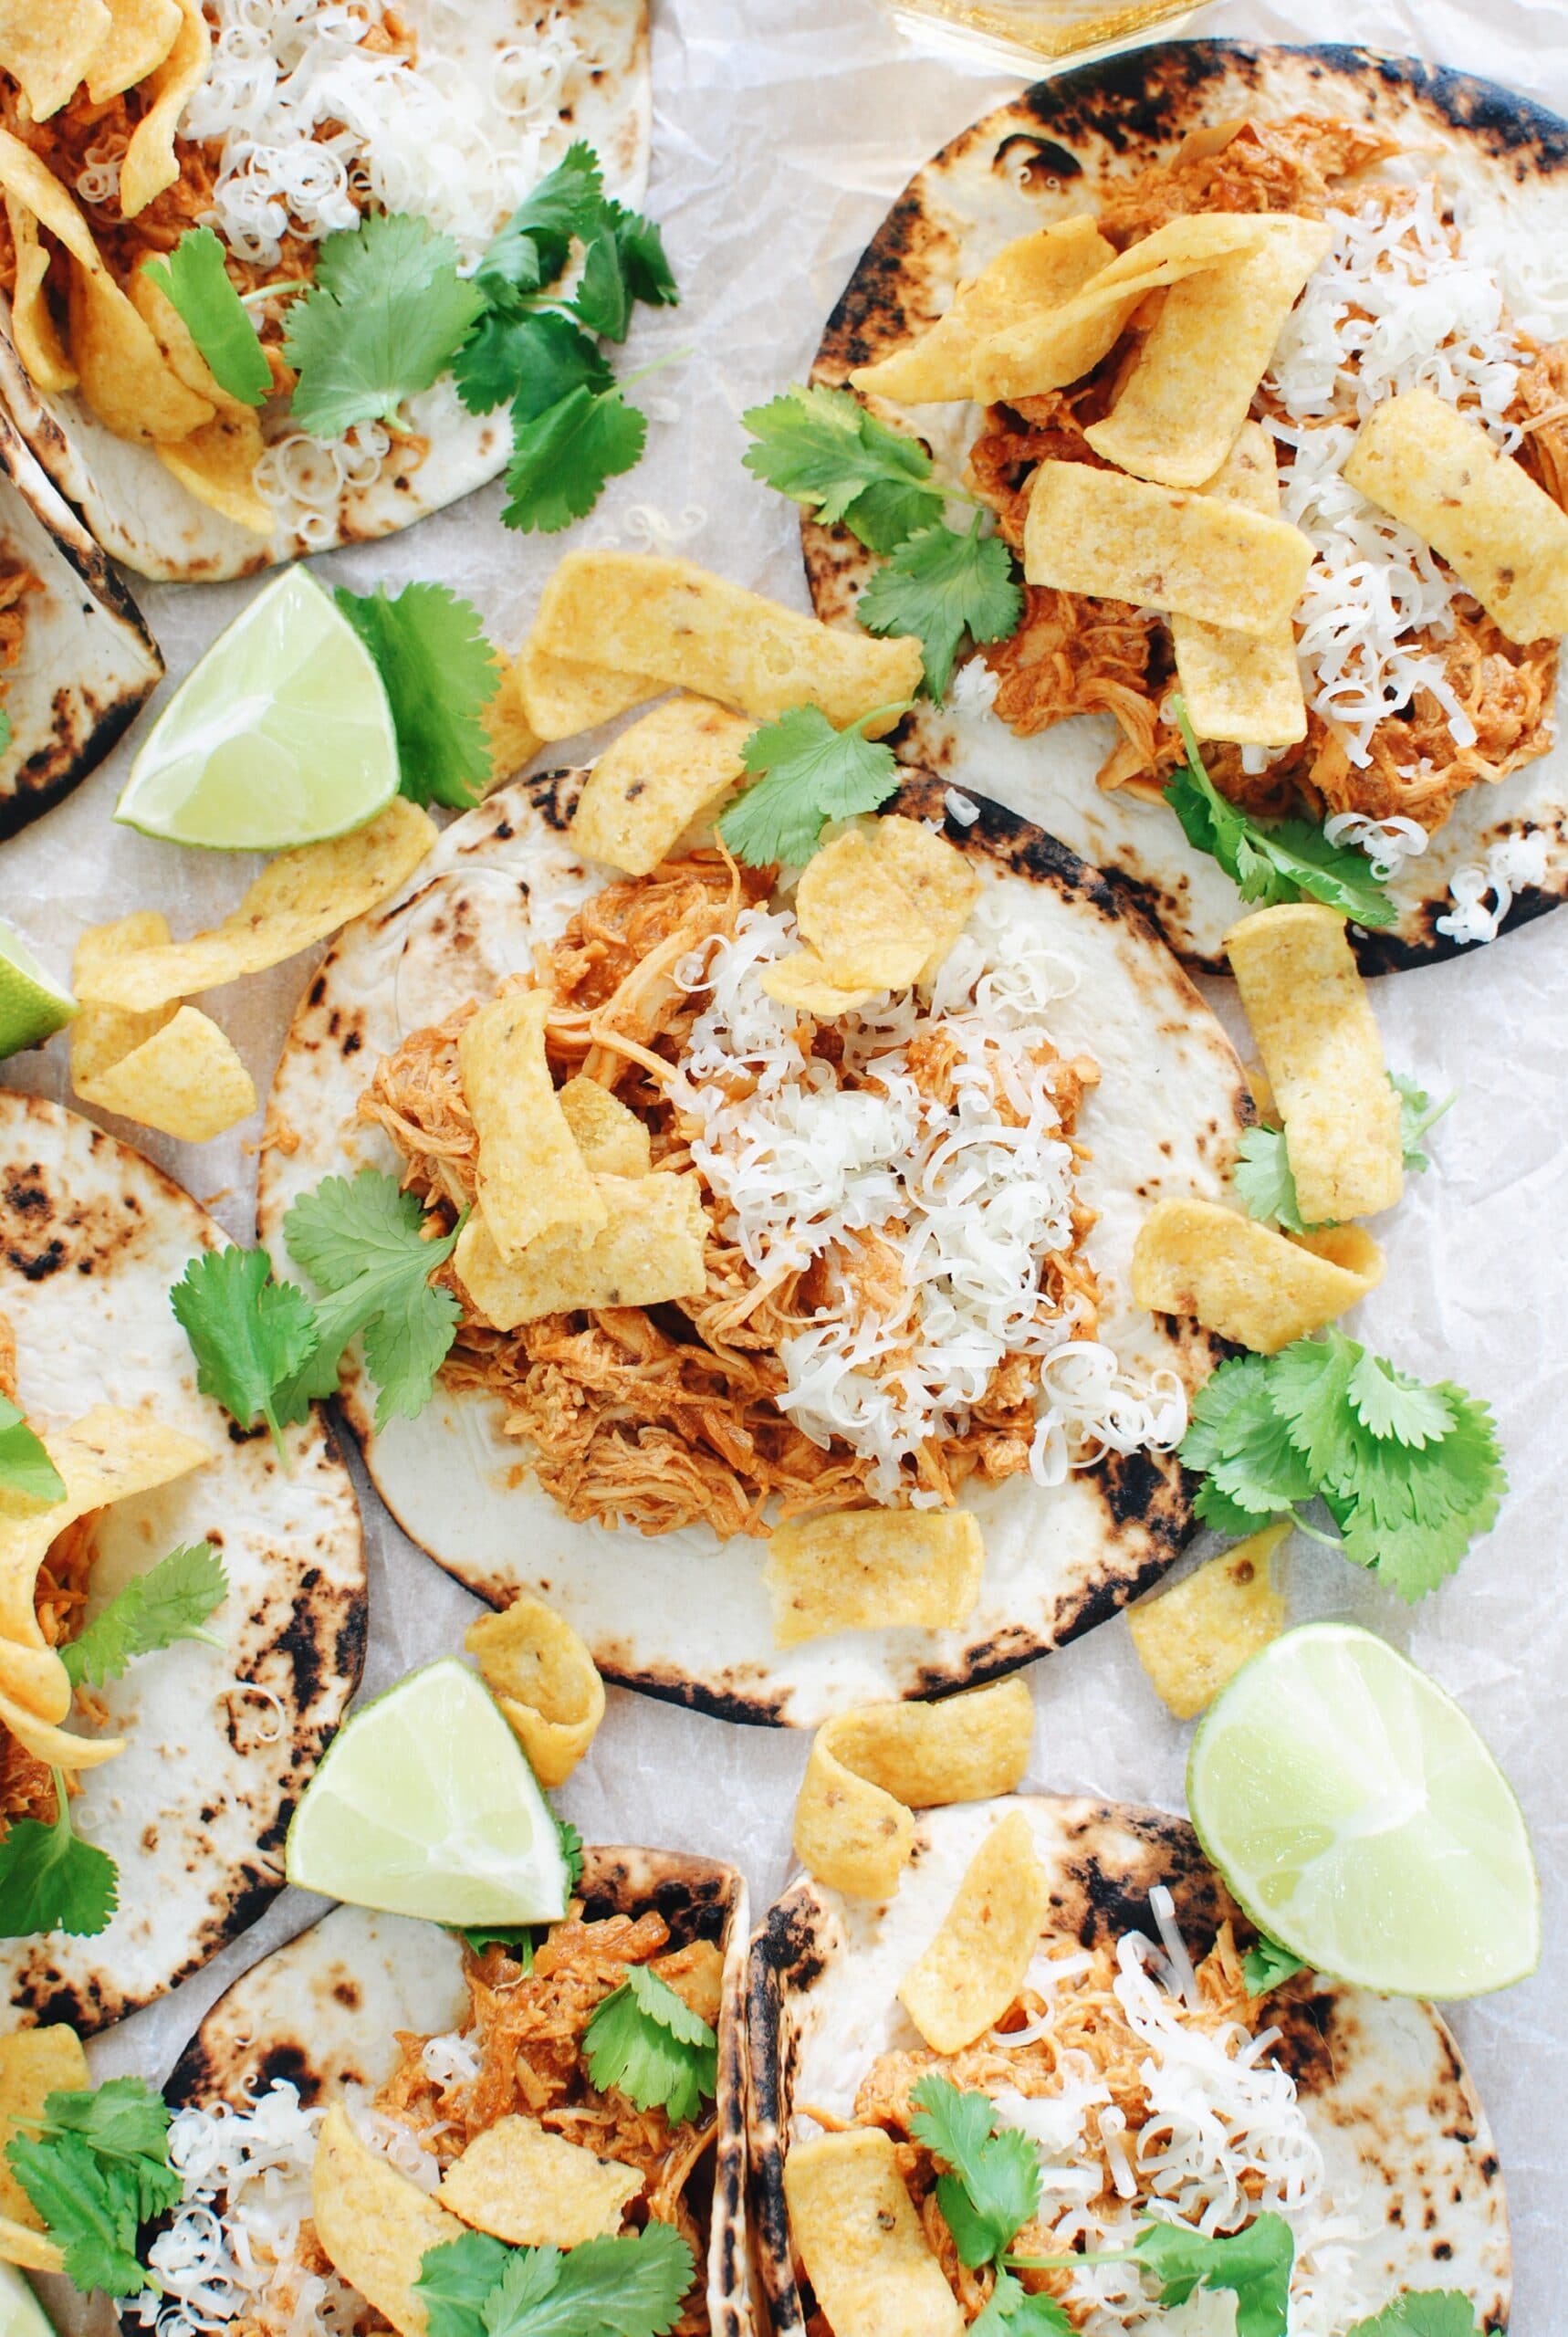 Slow Cooker Shredded BBQ Chicken Tacos from Bev Cooks